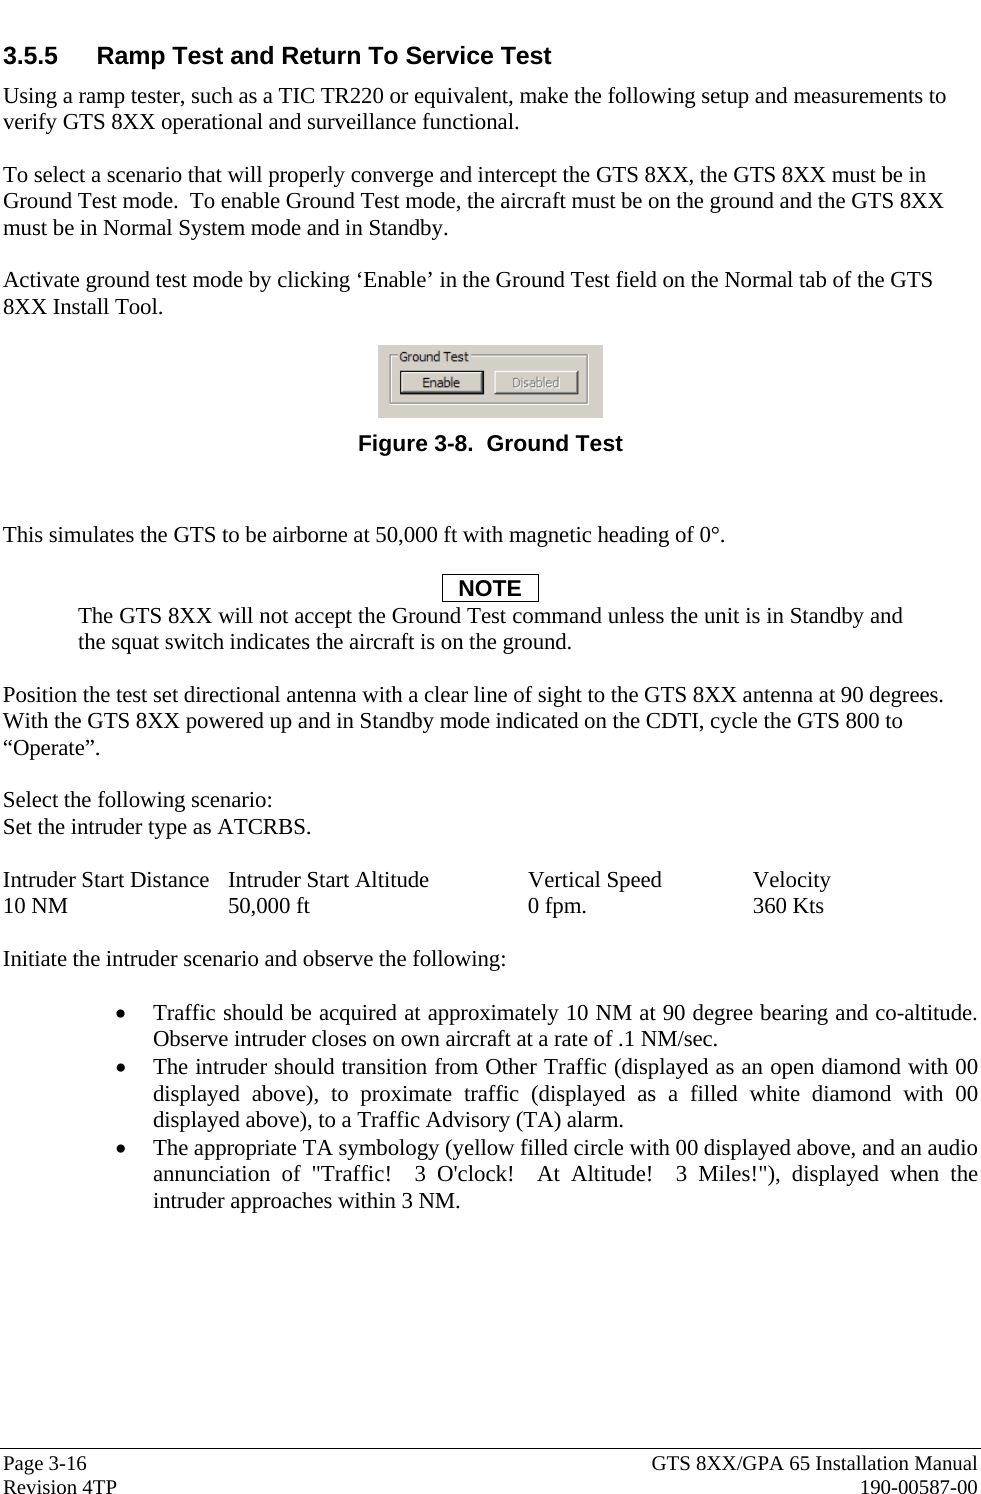  Page 3-16  GTS 8XX/GPA 65 Installation Manual Revision 4TP  190-00587-00 3.5.5  Ramp Test and Return To Service Test Using a ramp tester, such as a TIC TR220 or equivalent, make the following setup and measurements to verify GTS 8XX operational and surveillance functional.   To select a scenario that will properly converge and intercept the GTS 8XX, the GTS 8XX must be in Ground Test mode.  To enable Ground Test mode, the aircraft must be on the ground and the GTS 8XX must be in Normal System mode and in Standby.   Activate ground test mode by clicking ‘Enable’ in the Ground Test field on the Normal tab of the GTS 8XX Install Tool.    Figure 3-8.  Ground Test   This simulates the GTS to be airborne at 50,000 ft with magnetic heading of 0°.  NOTE The GTS 8XX will not accept the Ground Test command unless the unit is in Standby and the squat switch indicates the aircraft is on the ground.  Position the test set directional antenna with a clear line of sight to the GTS 8XX antenna at 90 degrees.  With the GTS 8XX powered up and in Standby mode indicated on the CDTI, cycle the GTS 800 to “Operate”.  Select the following scenario: Set the intruder type as ATCRBS.  Intruder Start Distance  Intruder Start Altitude    Vertical Speed    Velocity 10 NM   50,000 ft   0 fpm.     360 Kts  Initiate the intruder scenario and observe the following:    • Traffic should be acquired at approximately 10 NM at 90 degree bearing and co-altitude.  Observe intruder closes on own aircraft at a rate of .1 NM/sec.   • The intruder should transition from Other Traffic (displayed as an open diamond with 00 displayed above), to proximate traffic (displayed as a filled white diamond with 00 displayed above), to a Traffic Advisory (TA) alarm. • The appropriate TA symbology (yellow filled circle with 00 displayed above, and an audio annunciation of &quot;Traffic!  3 O&apos;clock!  At Altitude!  3 Miles!&quot;), displayed when the intruder approaches within 3 NM. 